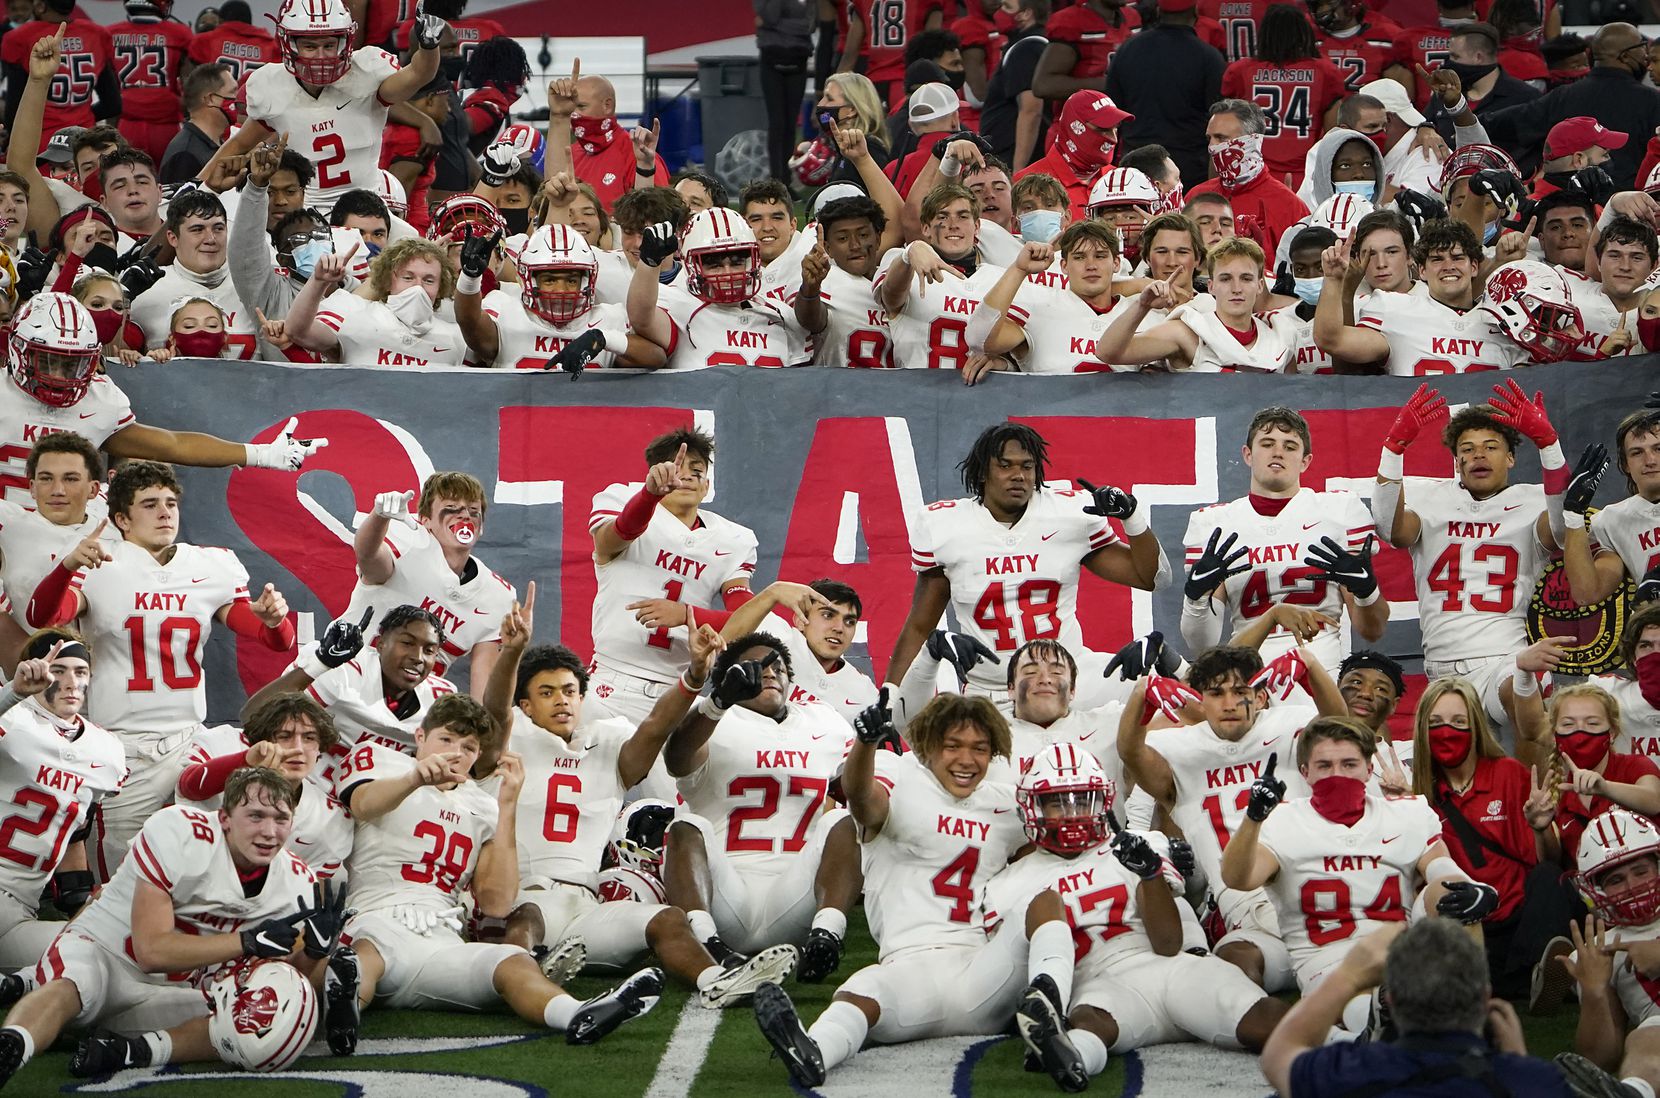 Katy players celebrate their victory over Cedar Hill in the Class 6A Division II state football championship game at AT&T Stadium on Saturday, Jan. 16, 2021, in Arlington, Texas. Katy won the game 51-14.